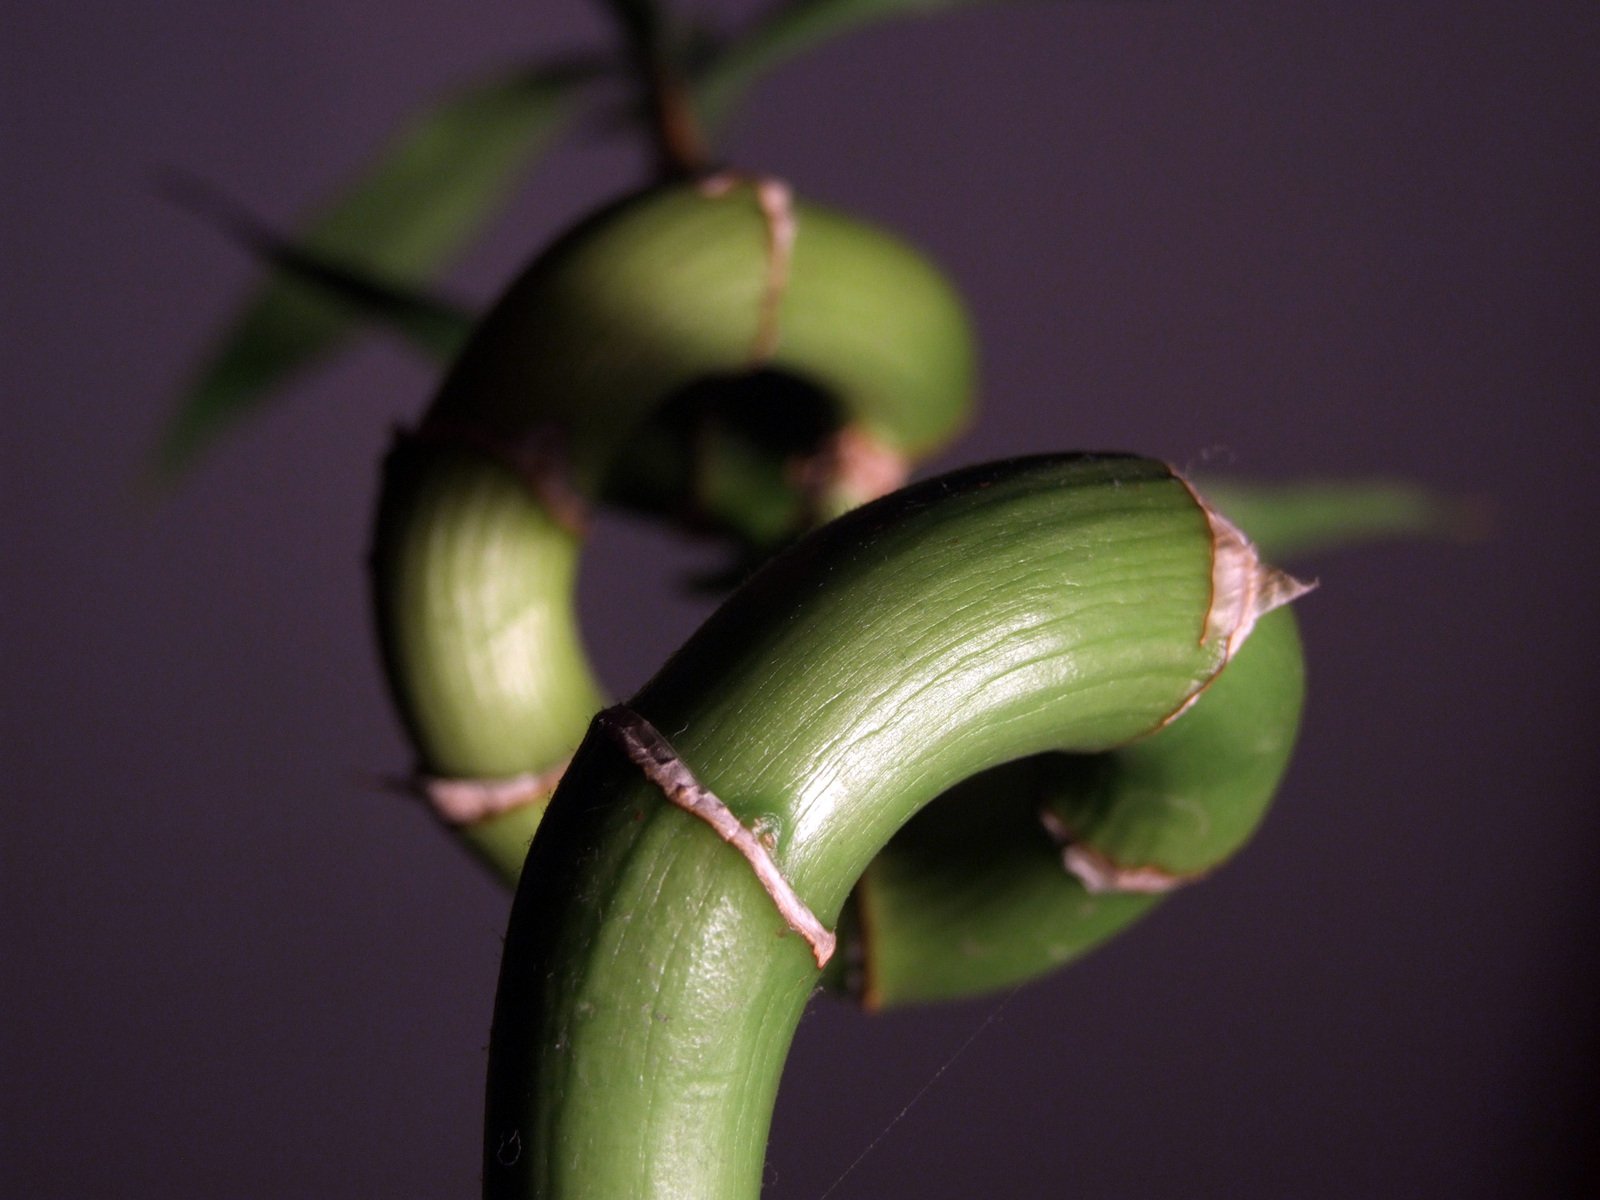 a pair of green bananas growing on a tree